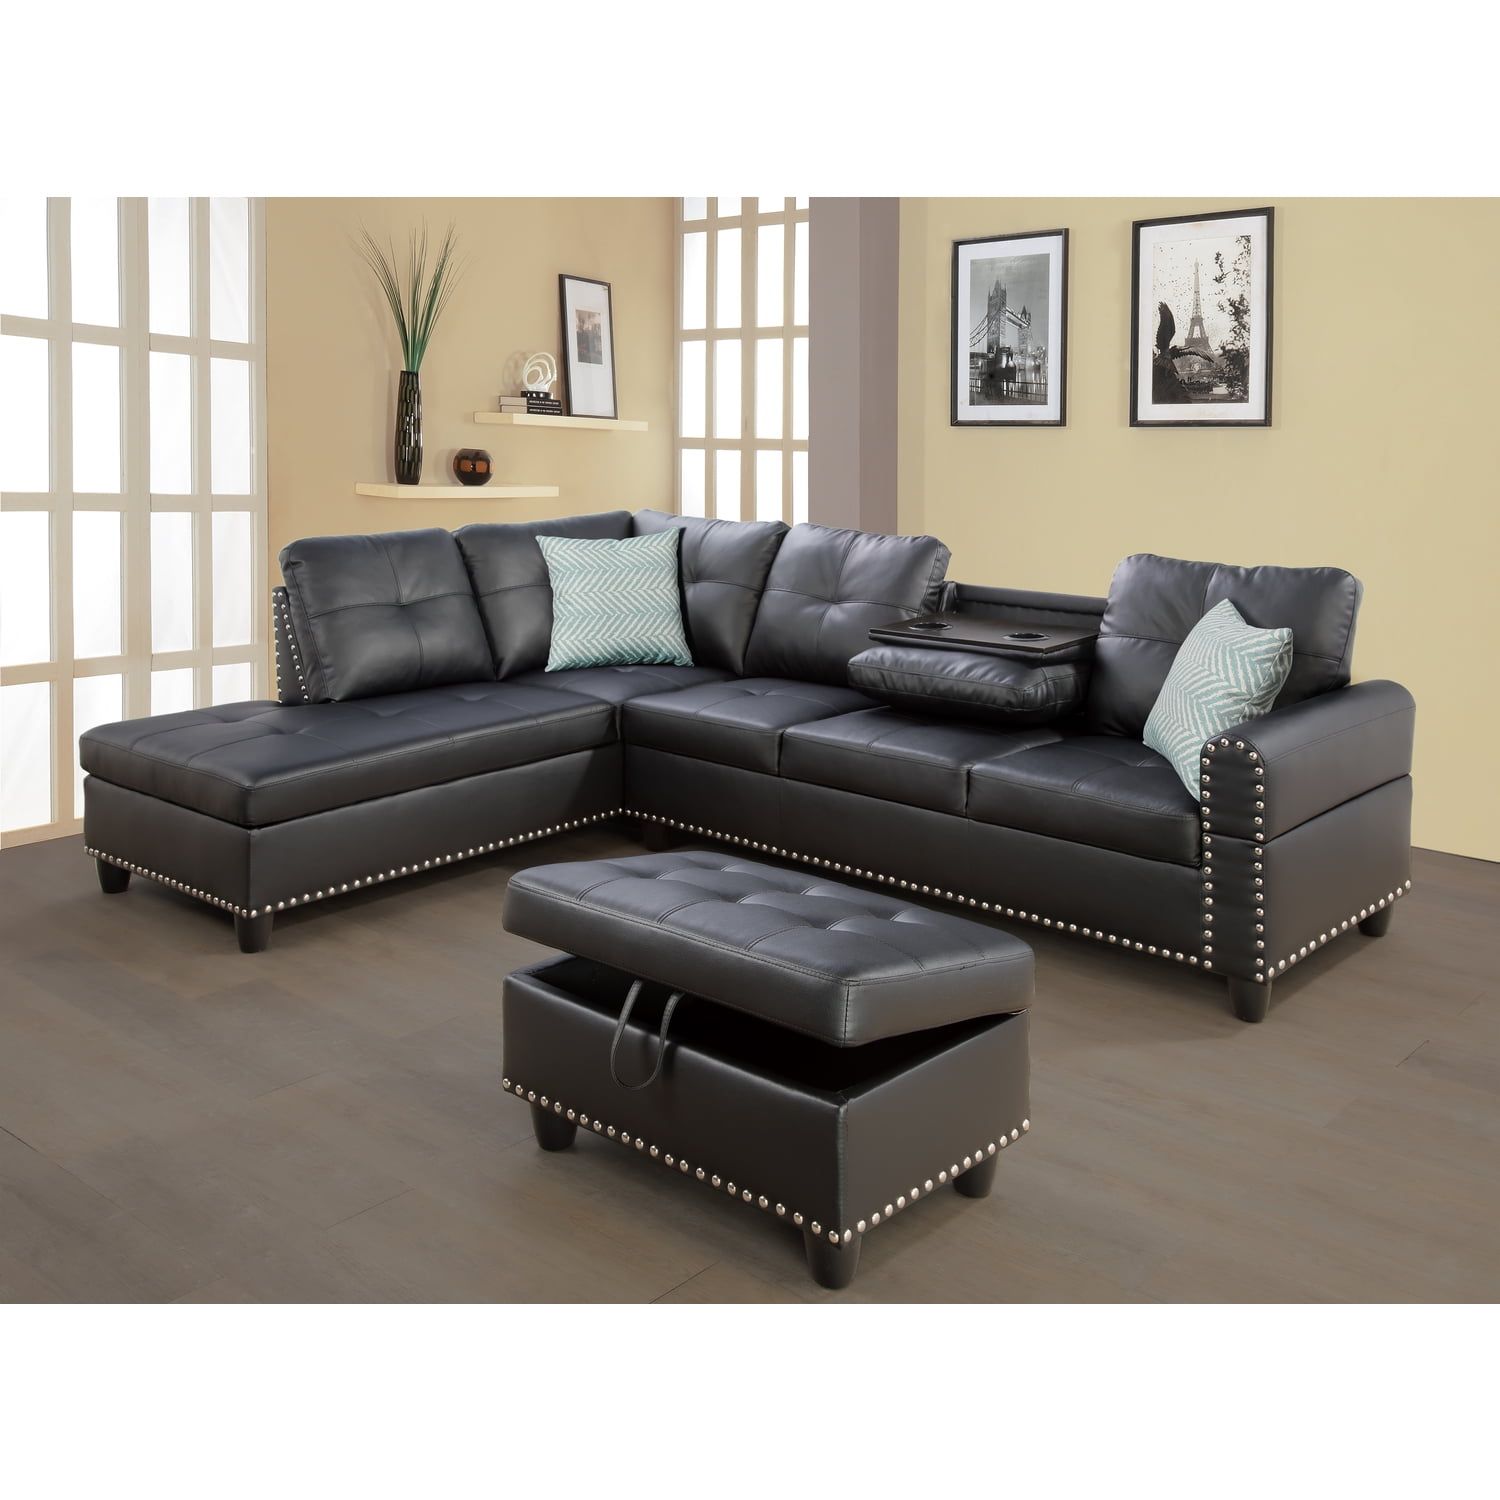 Devion Furniture Faux Leather Sectional Sofa With Ottoman Black –  Walmart Intended For Faux Leather Sectional Sofa Sets (Photo 5 of 15)